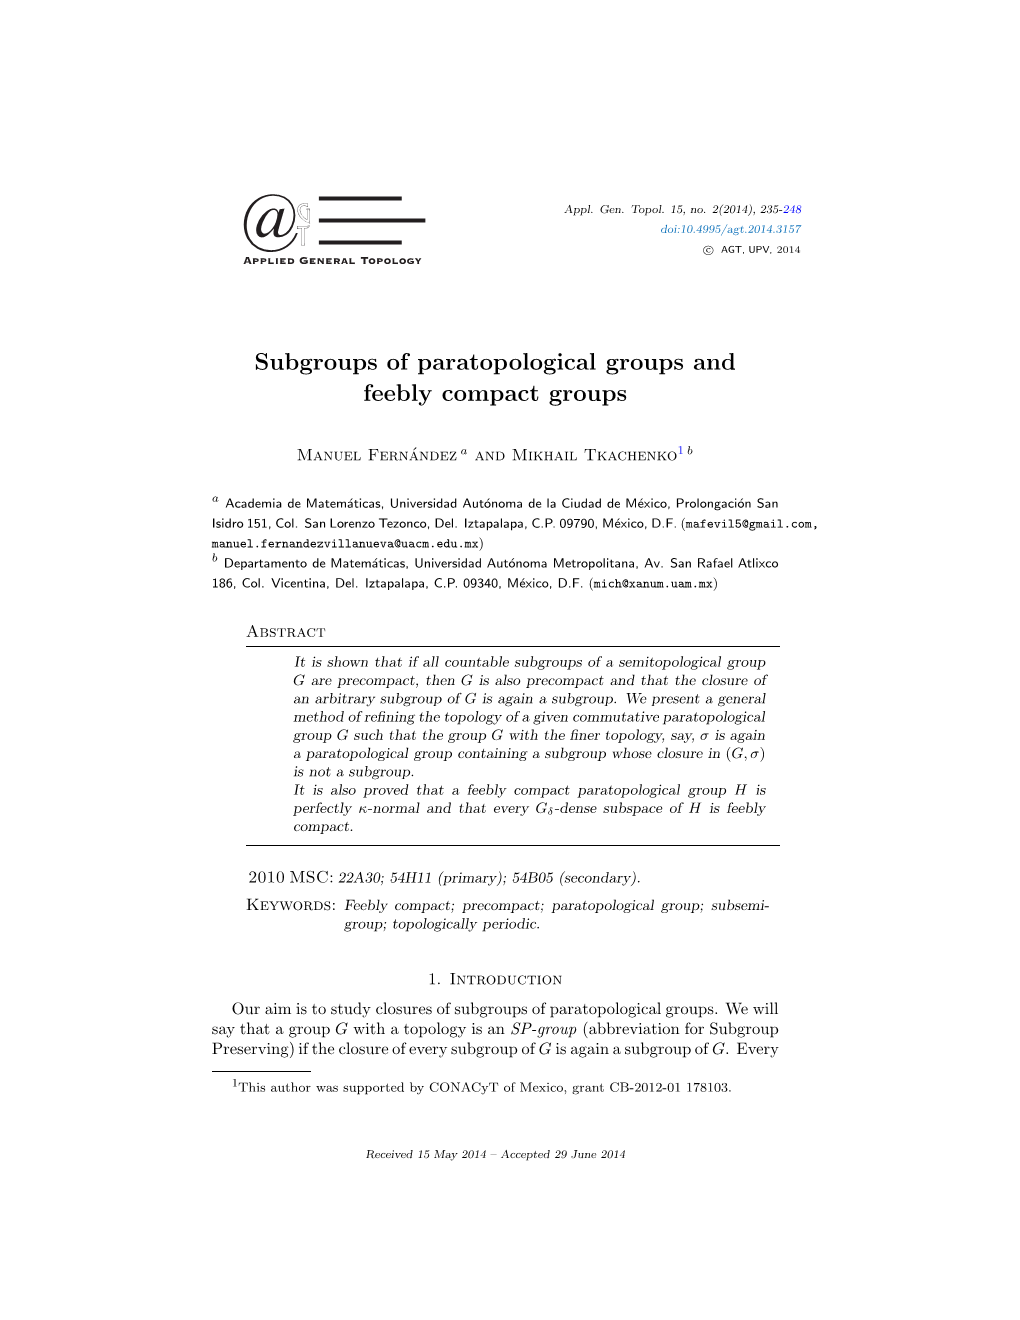 Subgroups of Paratopological Groups and Feebly Compact Groups